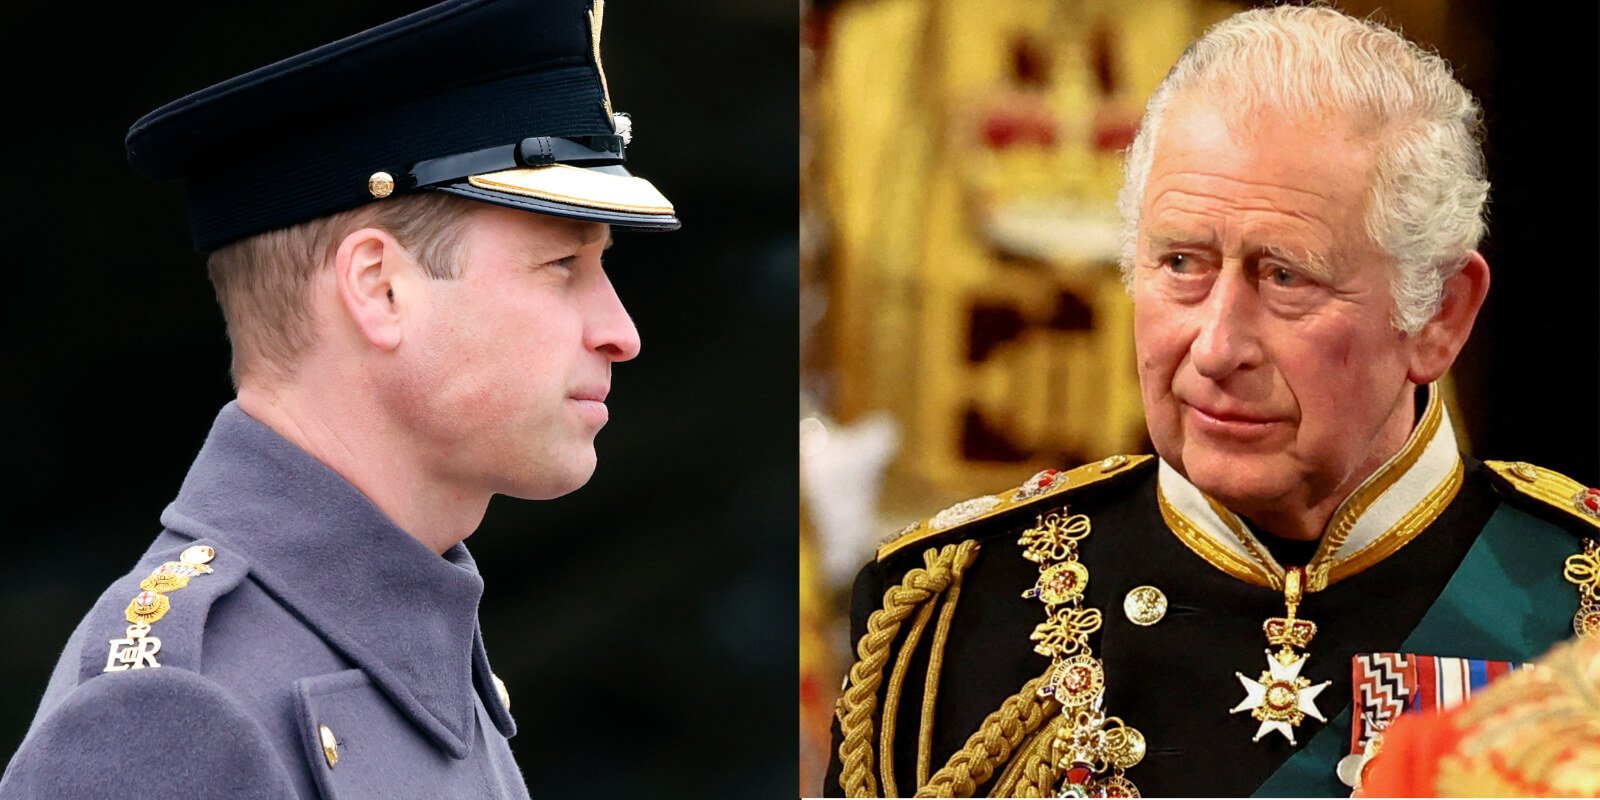 Prince William and his father King Charles in side-by-side photographs.